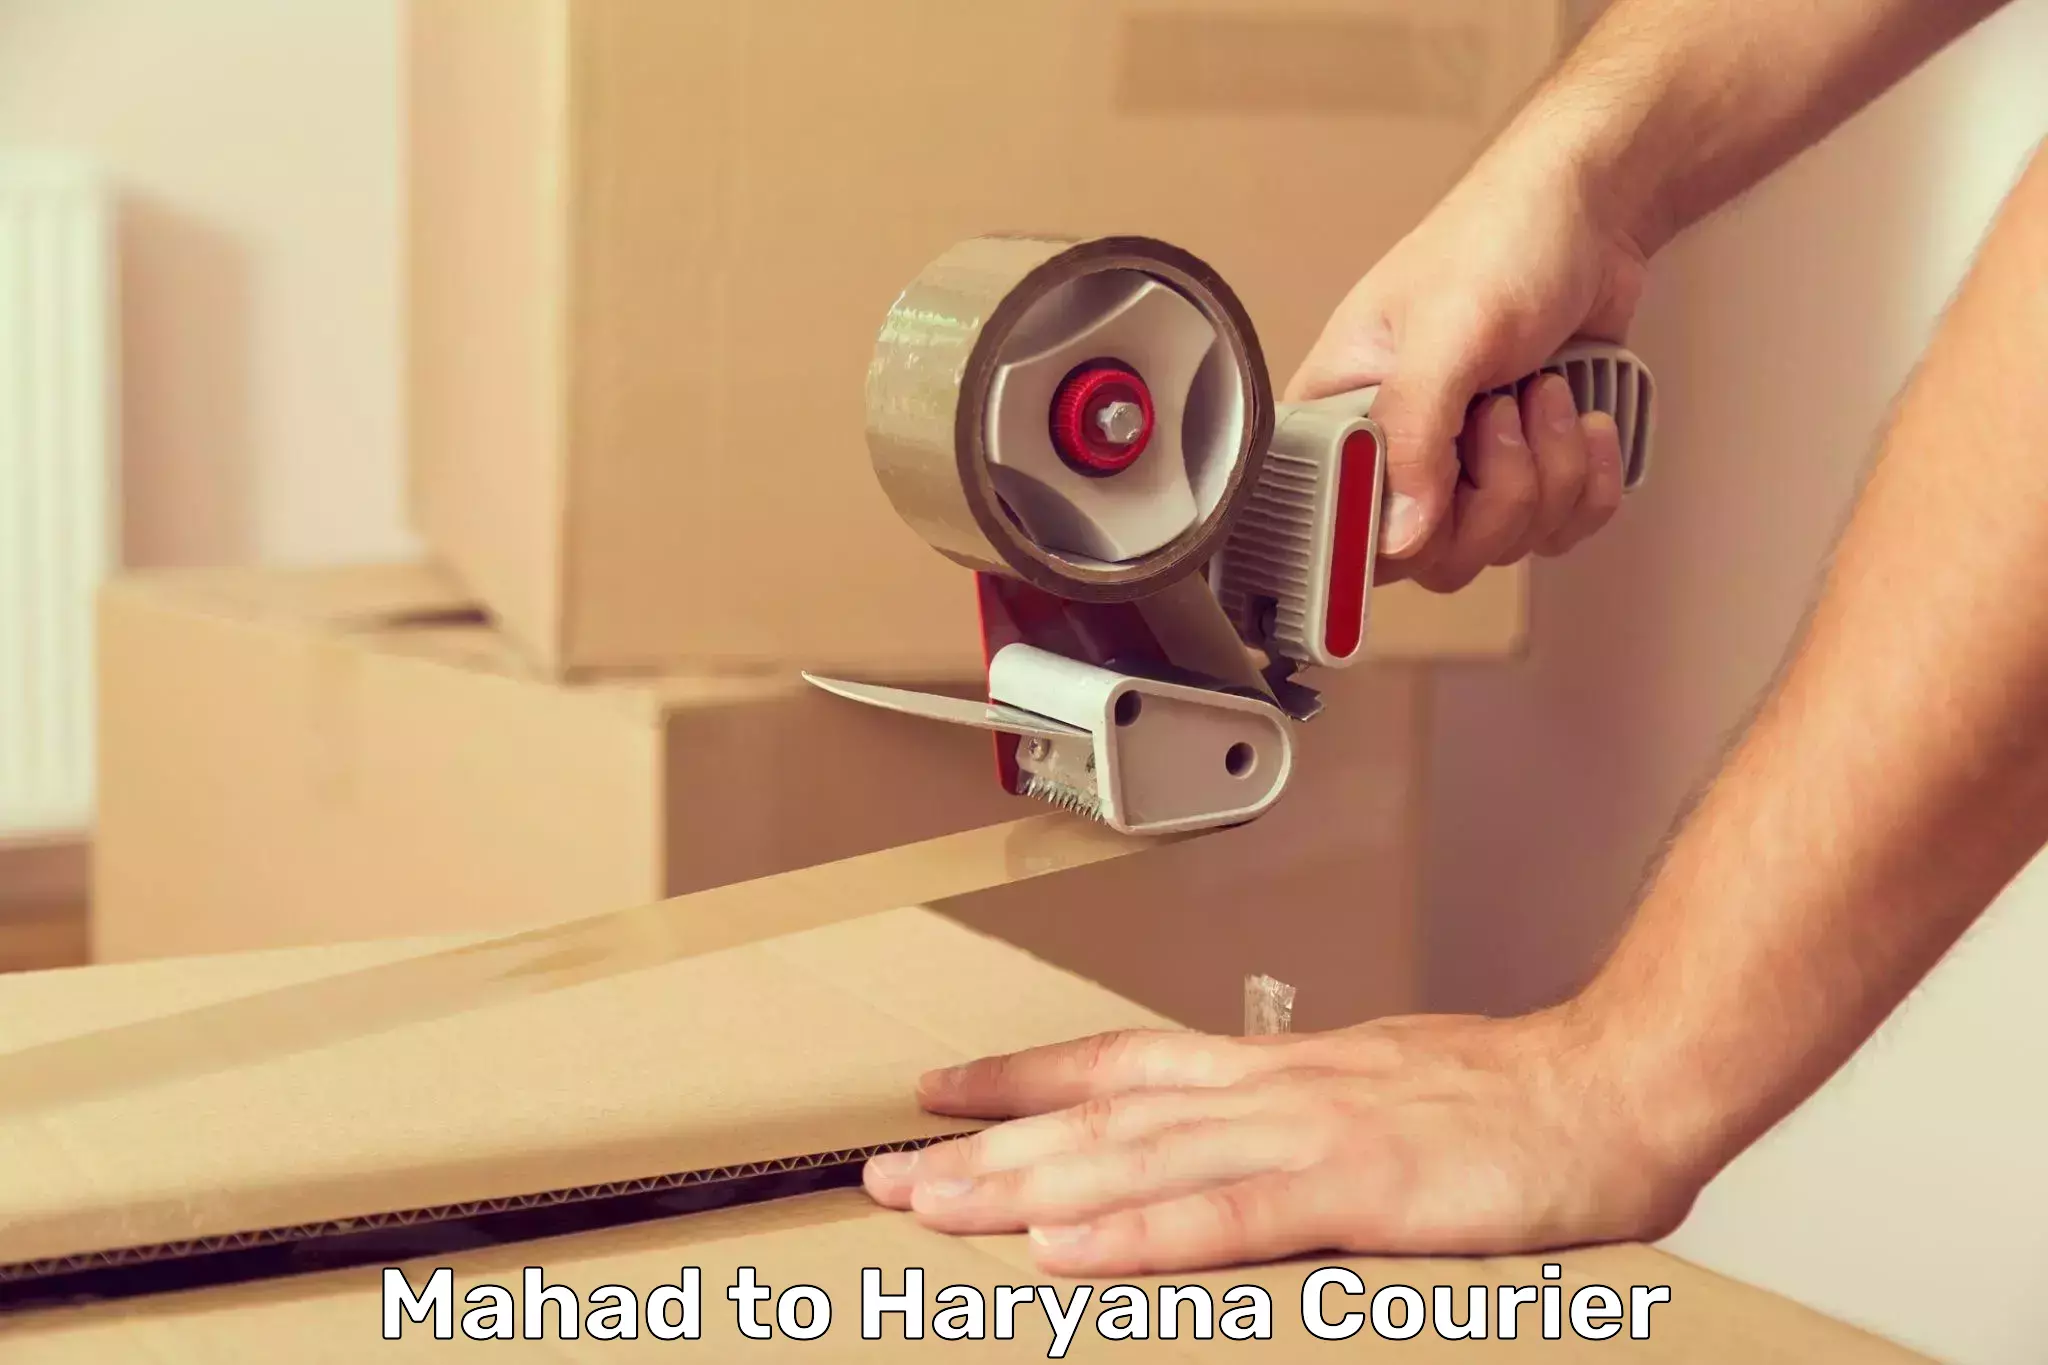 Flexible delivery schedules Mahad to Haryana